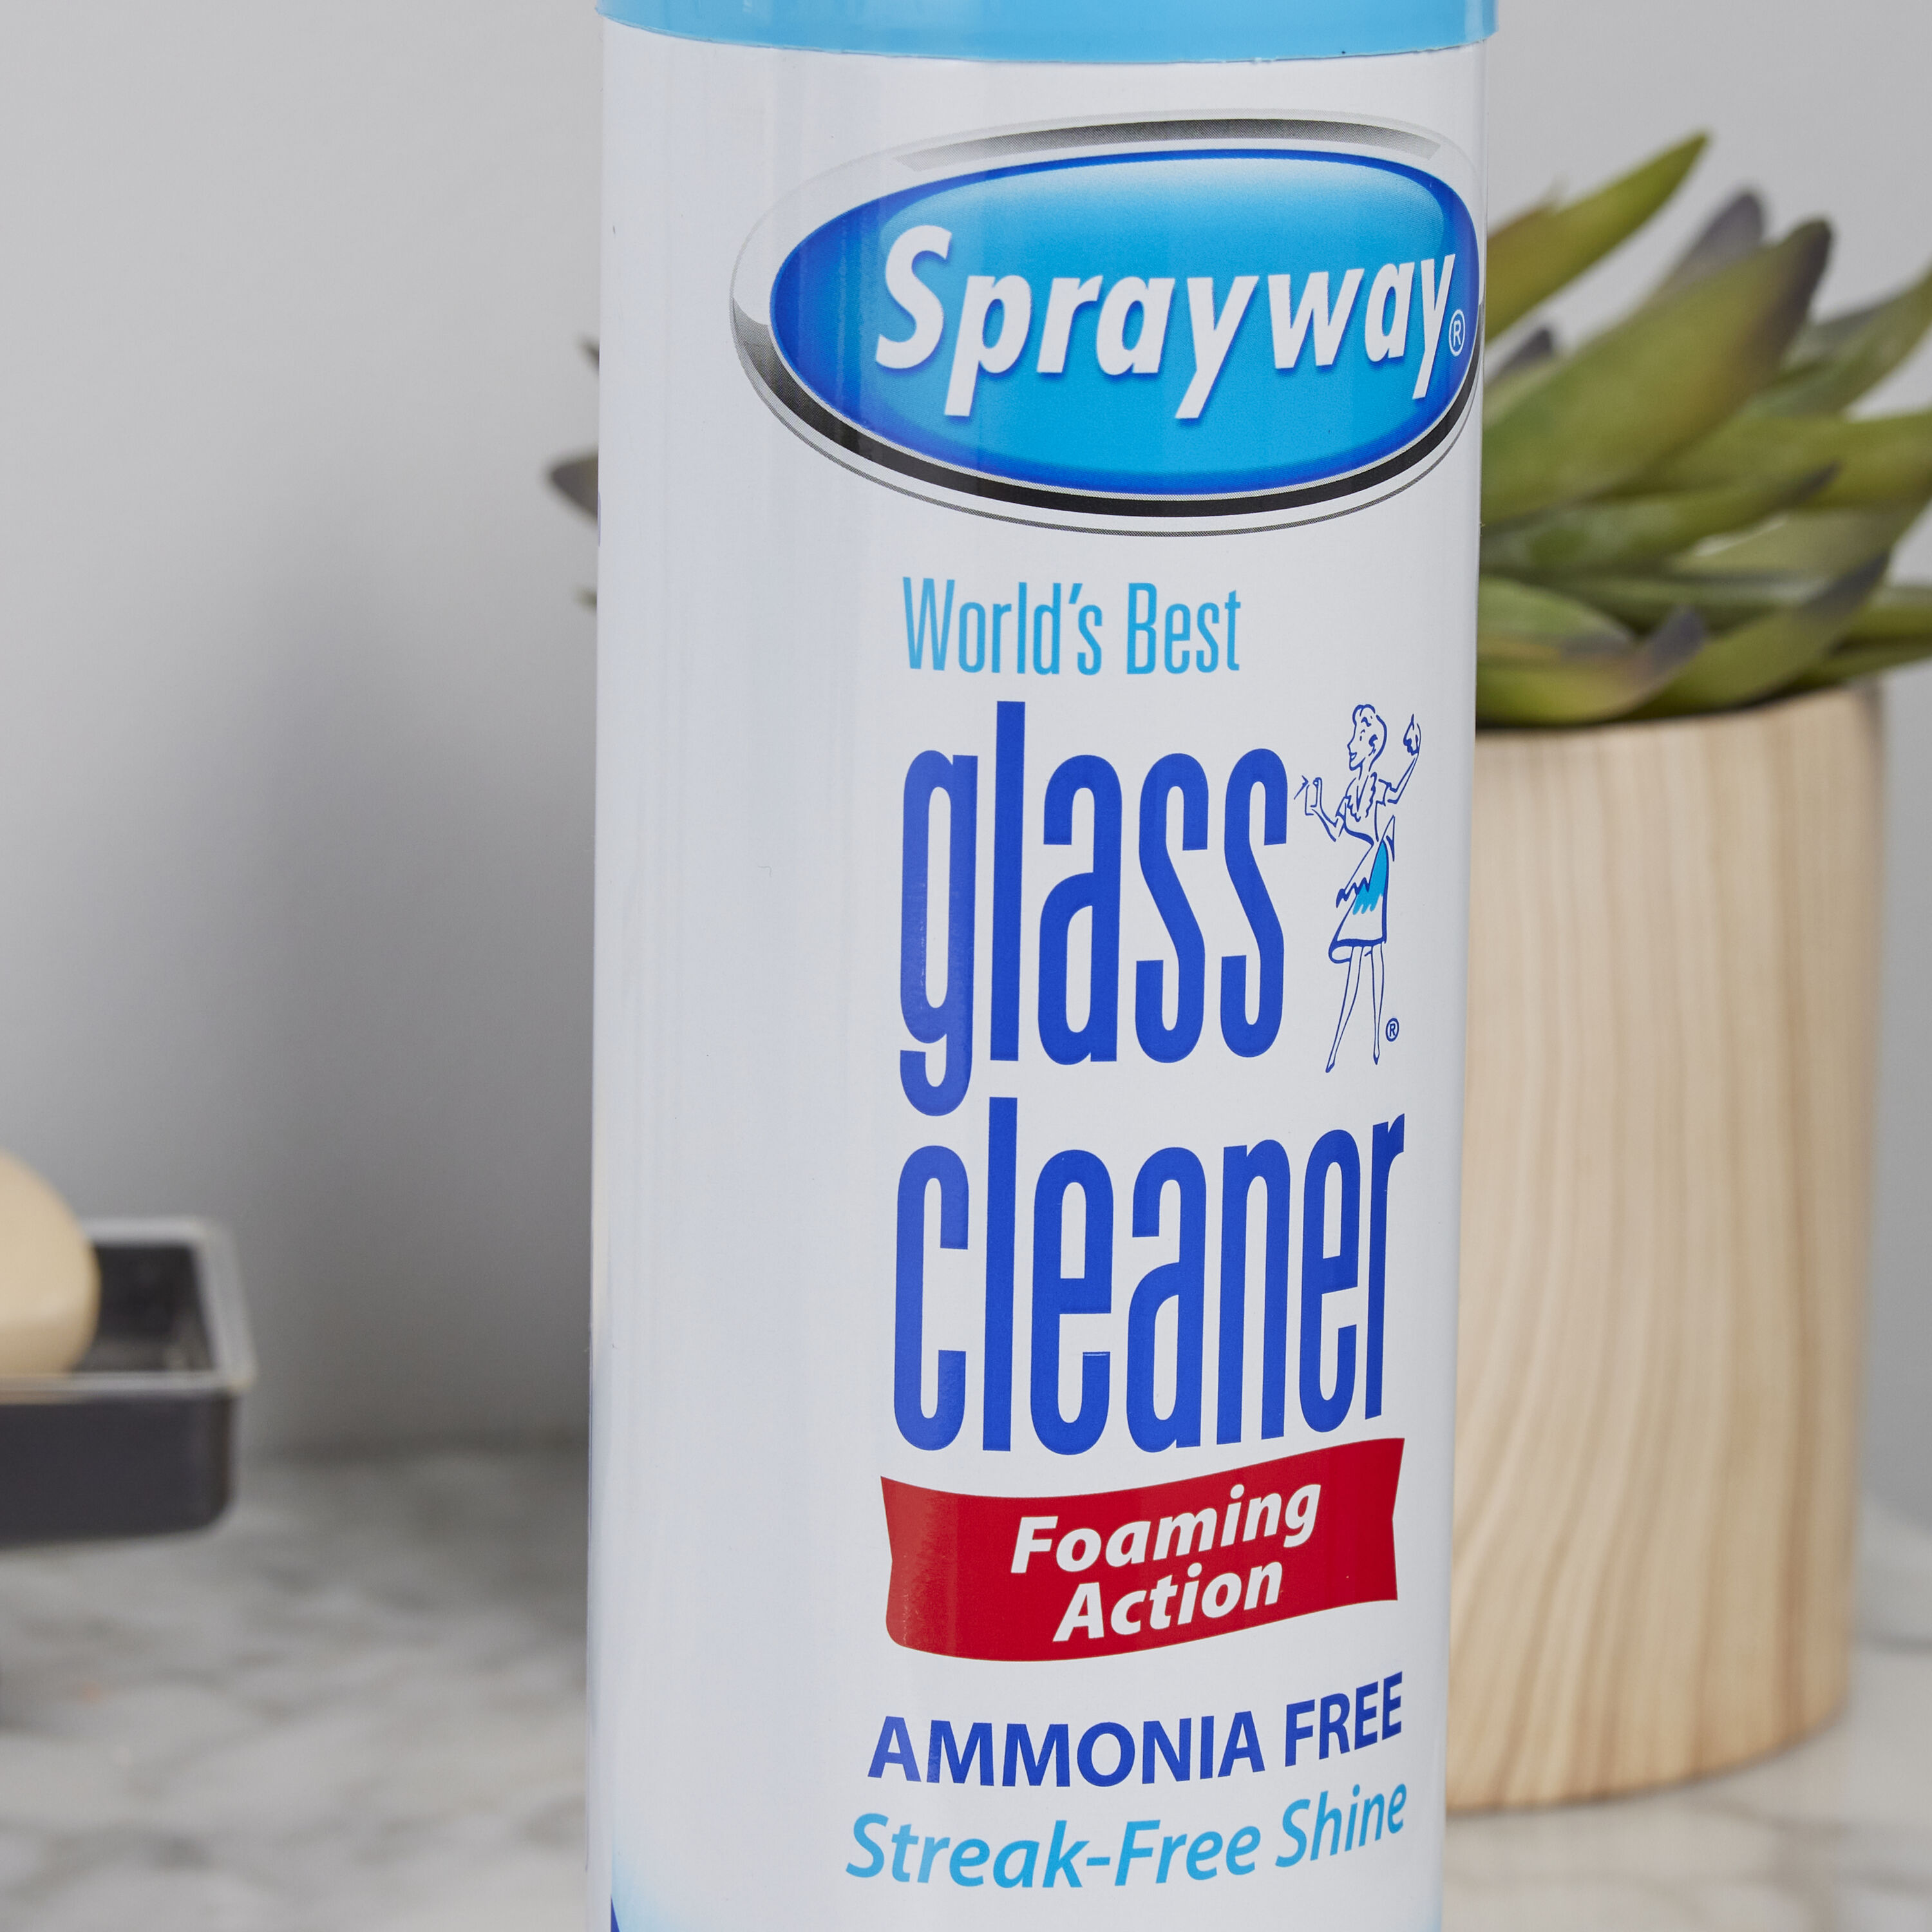 Sprayway Glass Cleaner, Foaming Action - 23 oz